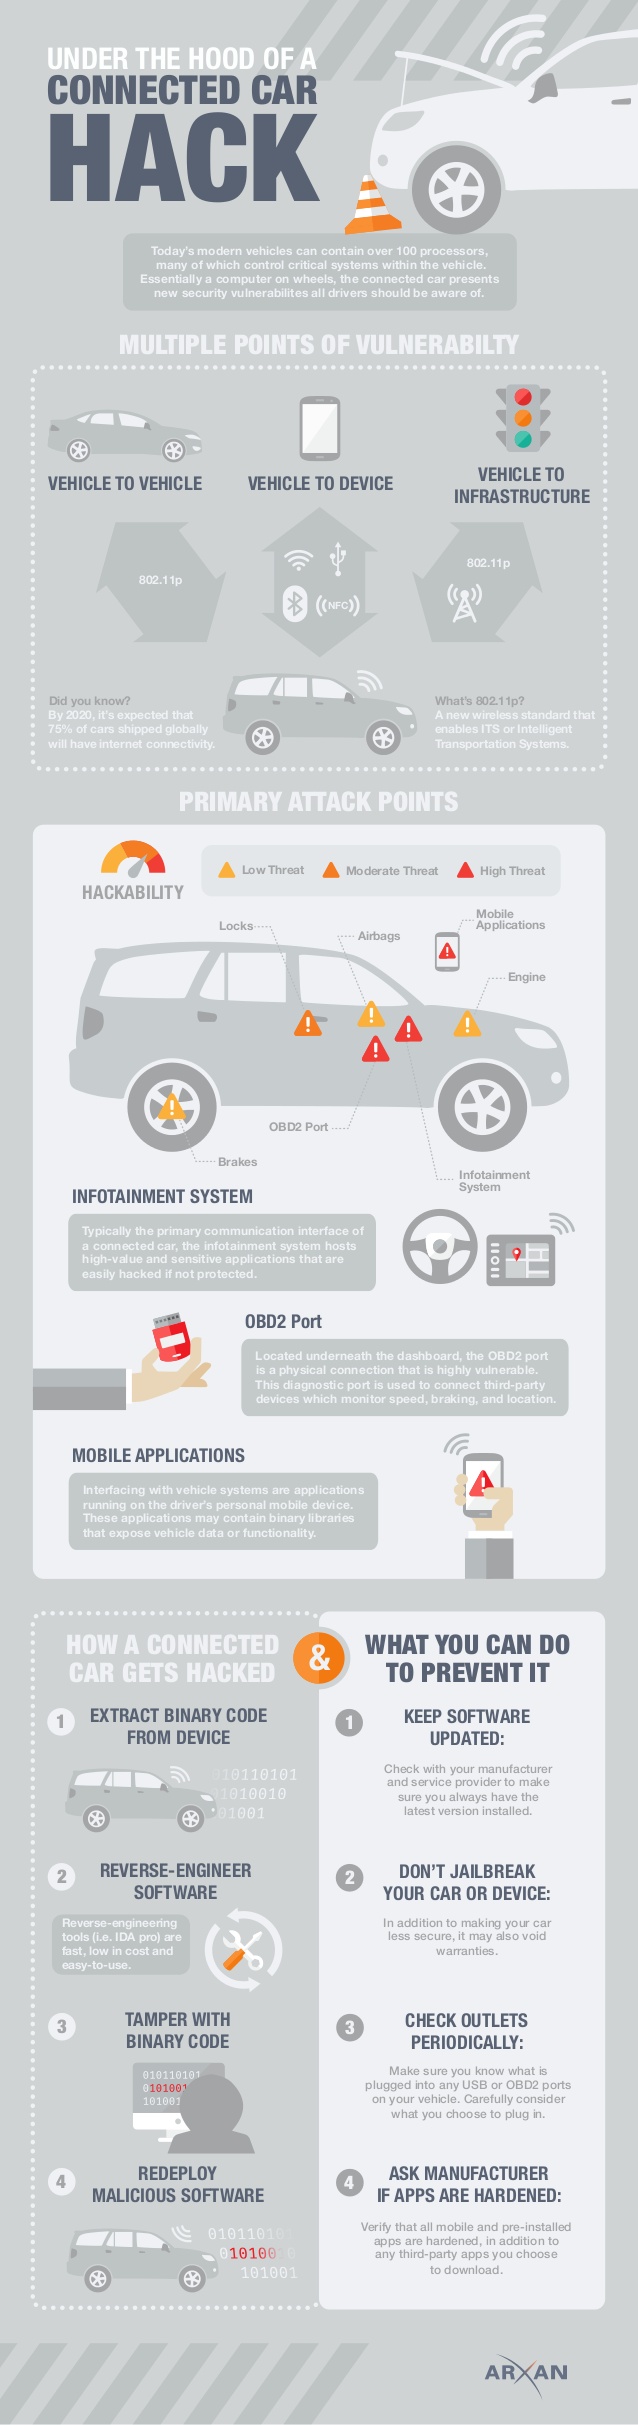 infographic-under-the-hood-of-a-connected-car-hack-1-638